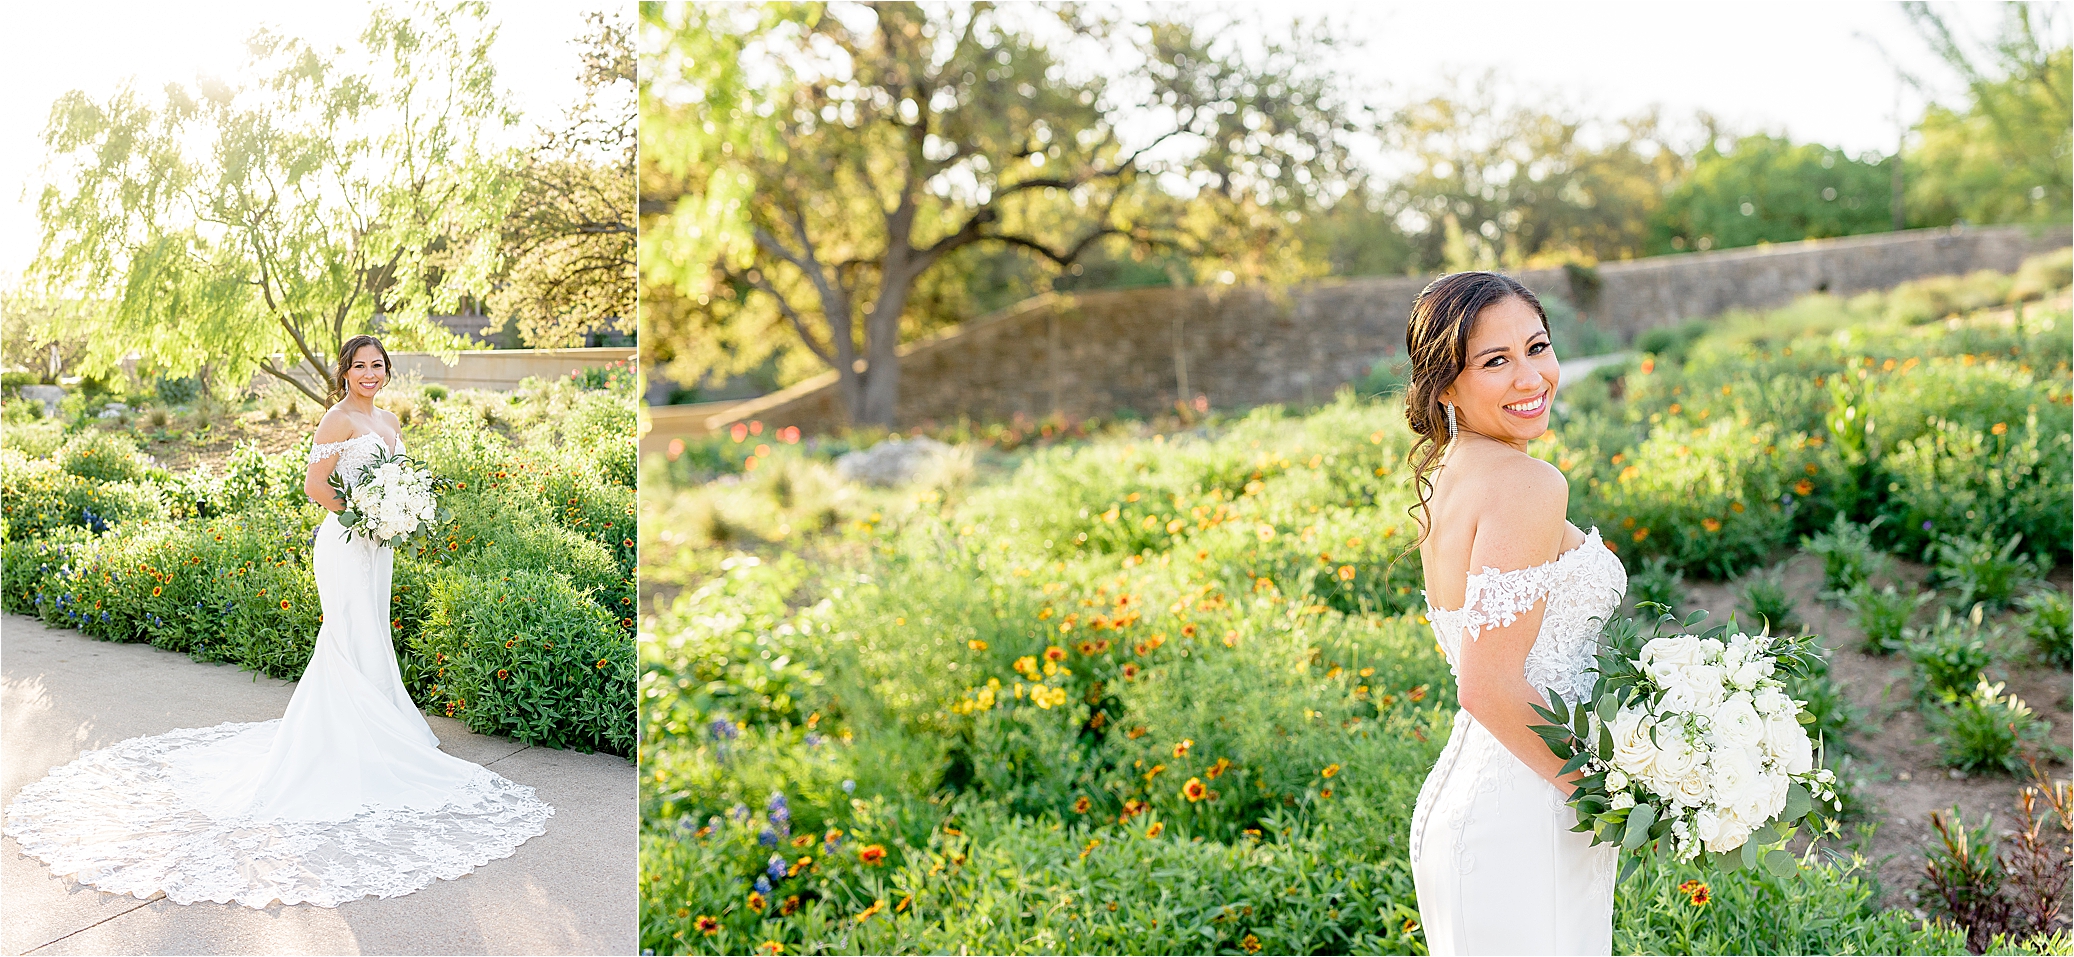 A bride peeks over her shoulders in front of flowers at the San Antonio Botanic Garden during her bridal portraits 